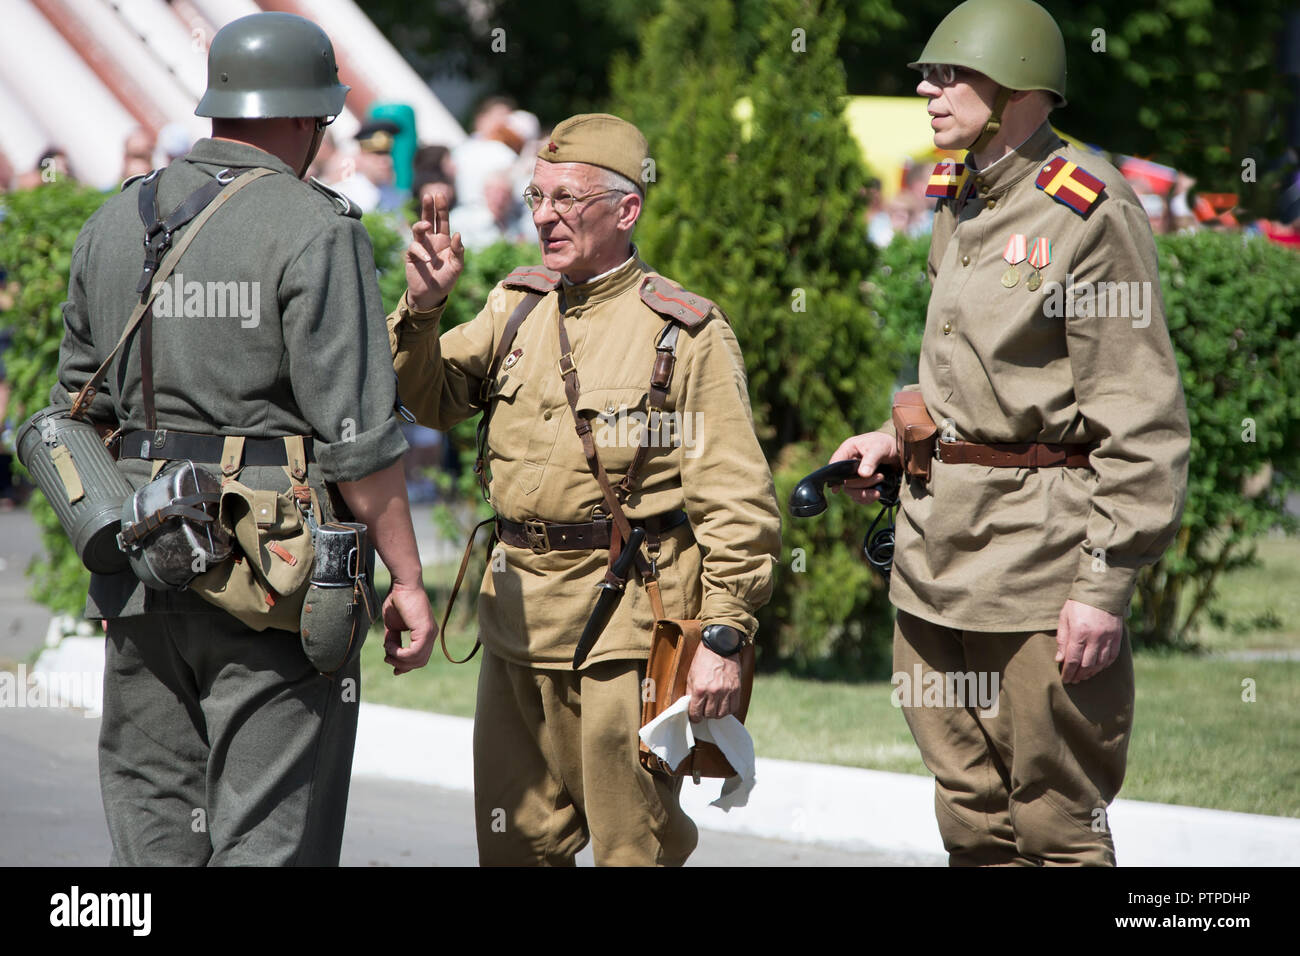 Belarus, Gomel. May 9, 2018. Victory Day. Reconstruction take Reichstag.Historical reconstruction in 1945, capture of the Reichstag.Russian soldiers a Stock Photo